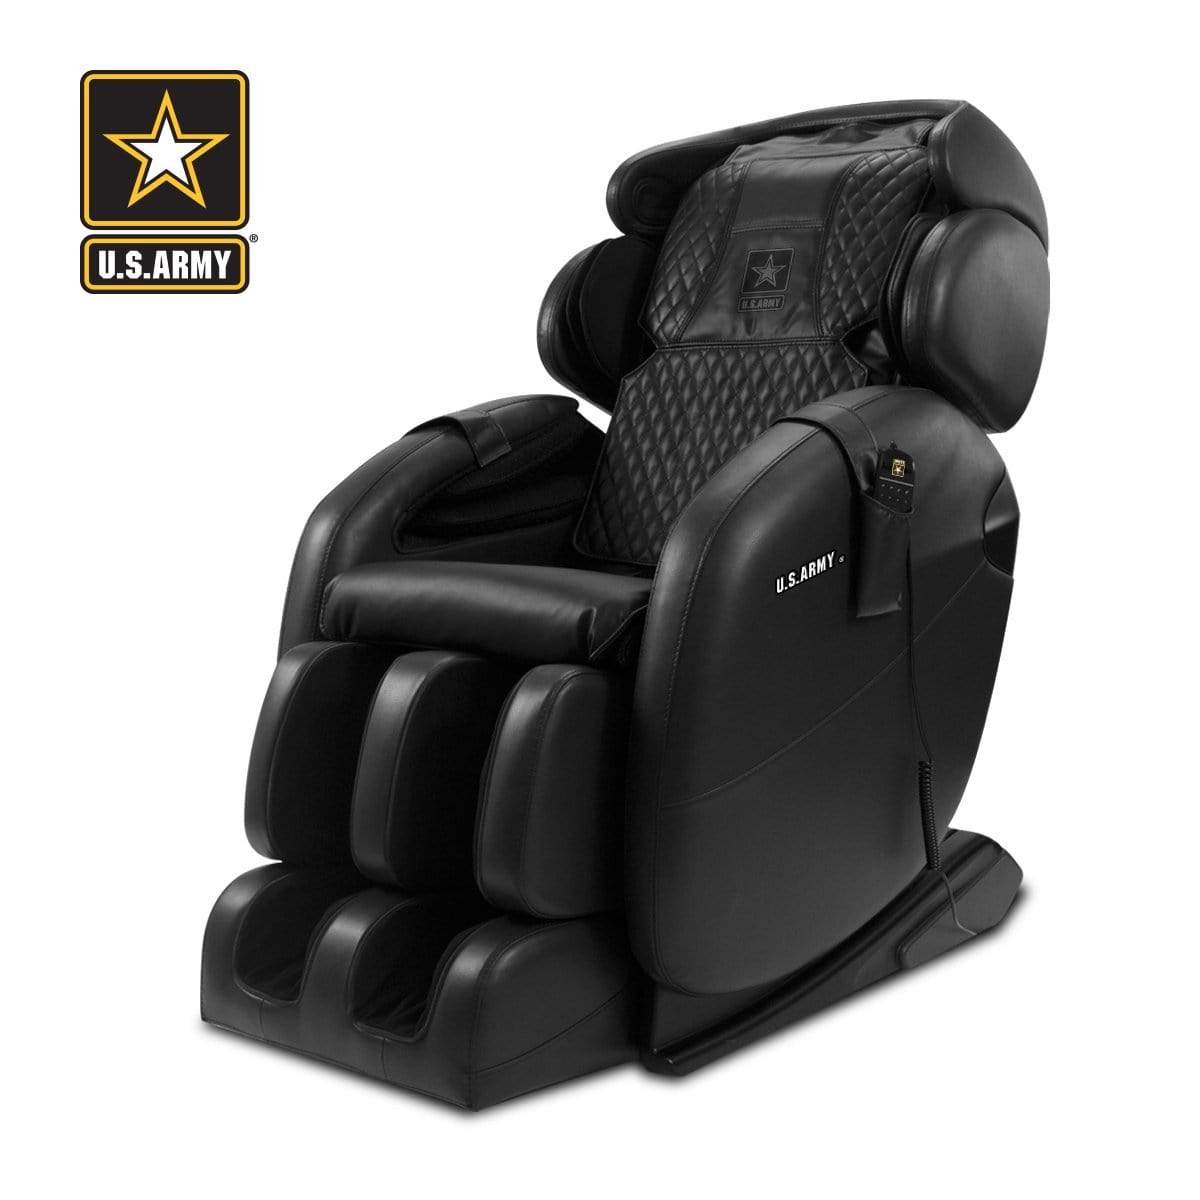 Ace Massage Chairs Black KAHUNA CHAIR - LM 6800S[ARMY EDITION] LM 6800S[ARMY EDITION]